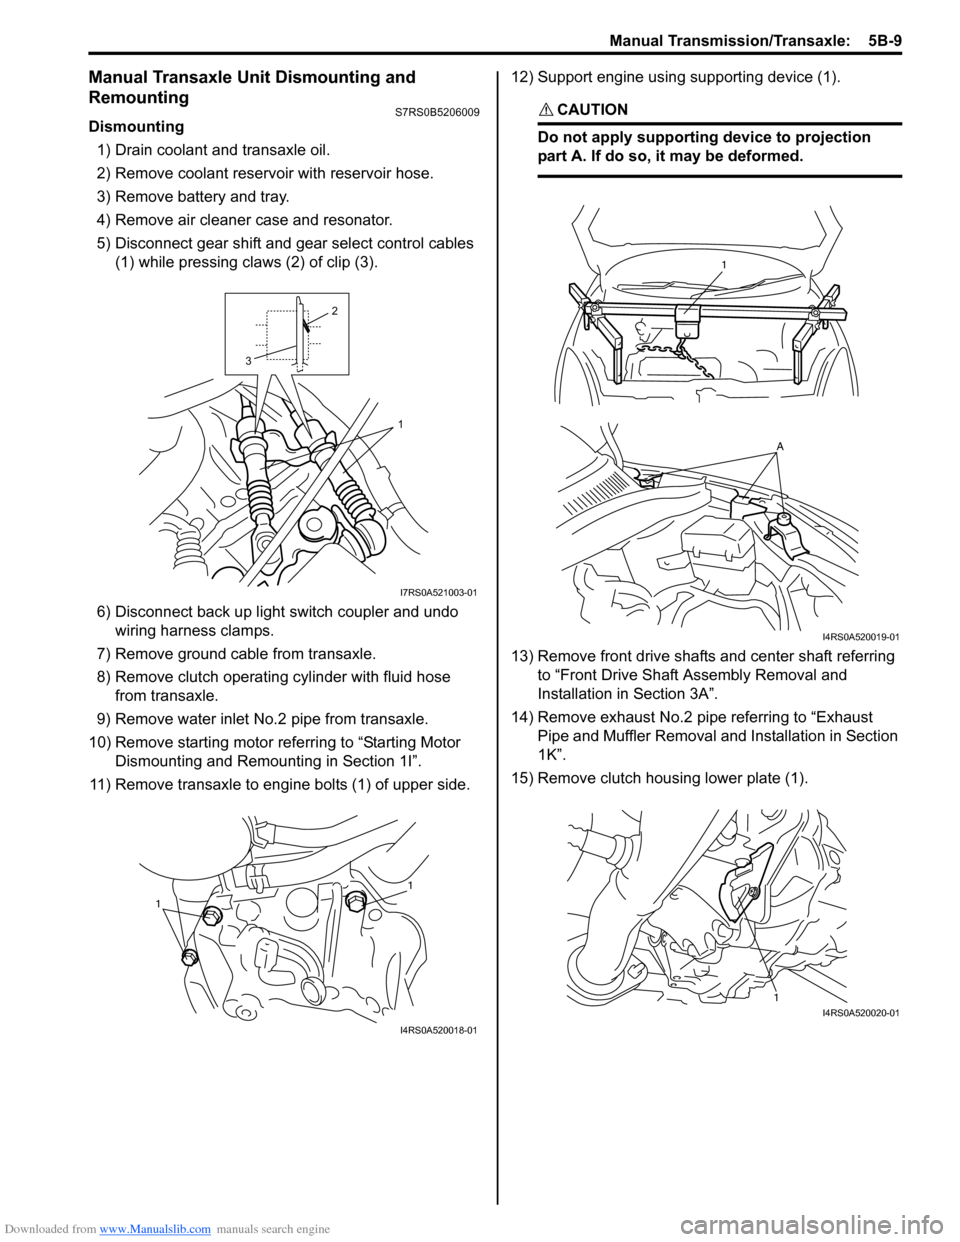 SUZUKI SWIFT 2005 2.G Service Workshop Manual Downloaded from www.Manualslib.com manuals search engine Manual Transmission/Transaxle:  5B-9
Manual Transaxle Unit Dismounting and 
Remounting
S7RS0B5206009
Dismounting1) Drain coolant and transaxle 